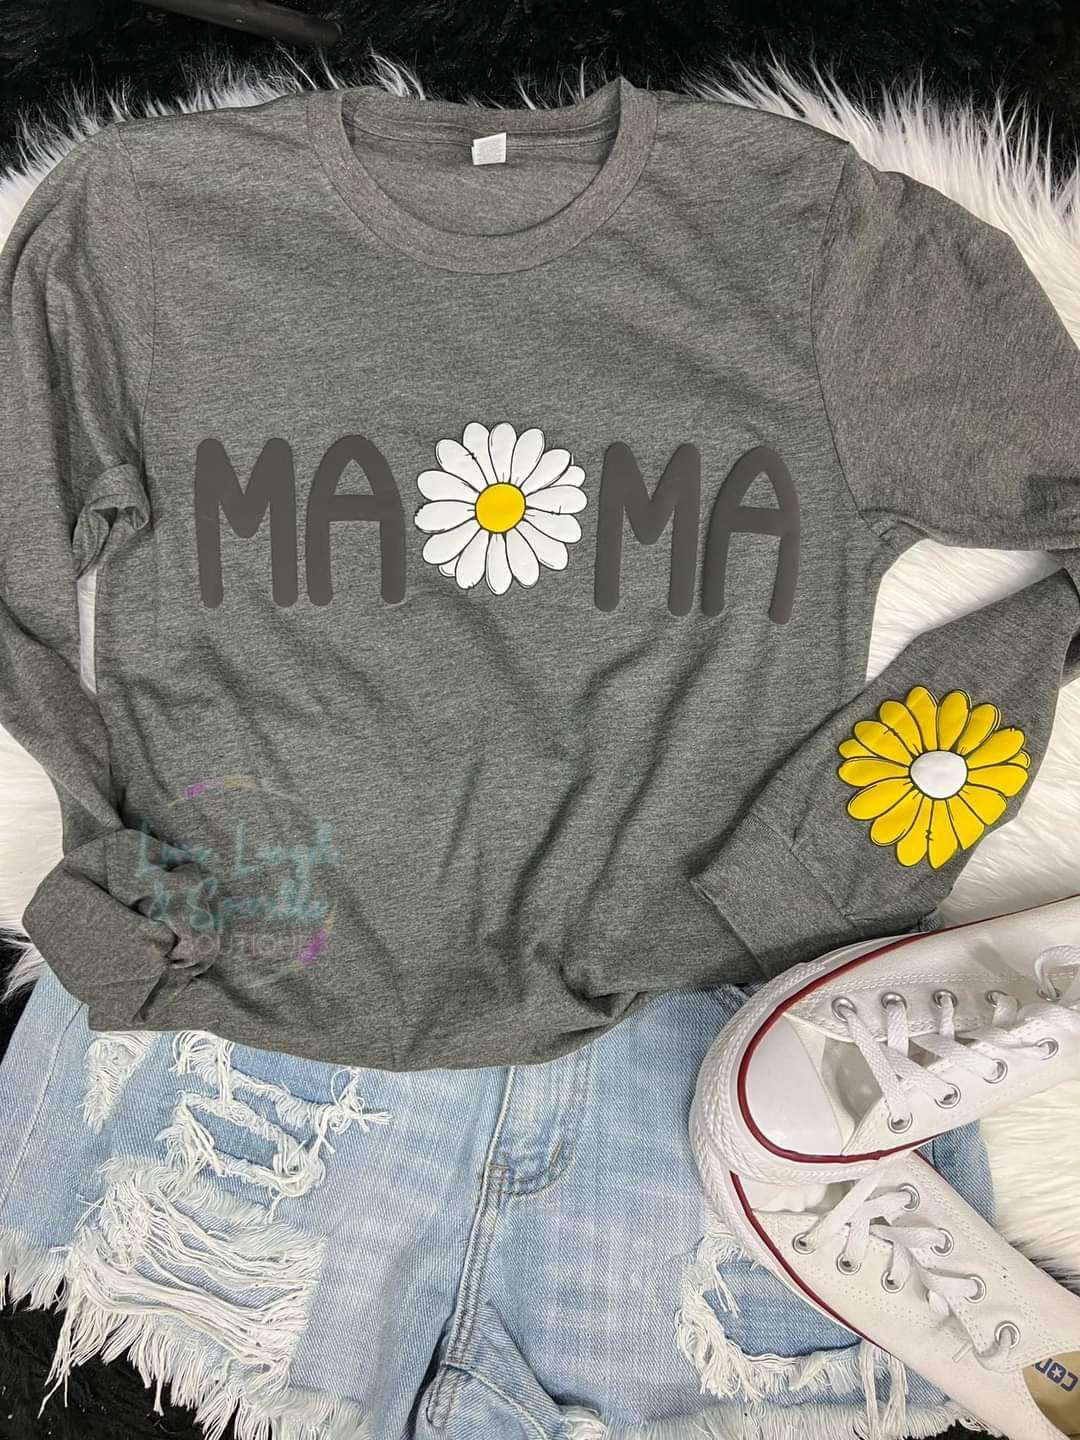 Gray long sleeve top with the word Mama on it and a white flower.  Also a yellow flower on the sleeve.